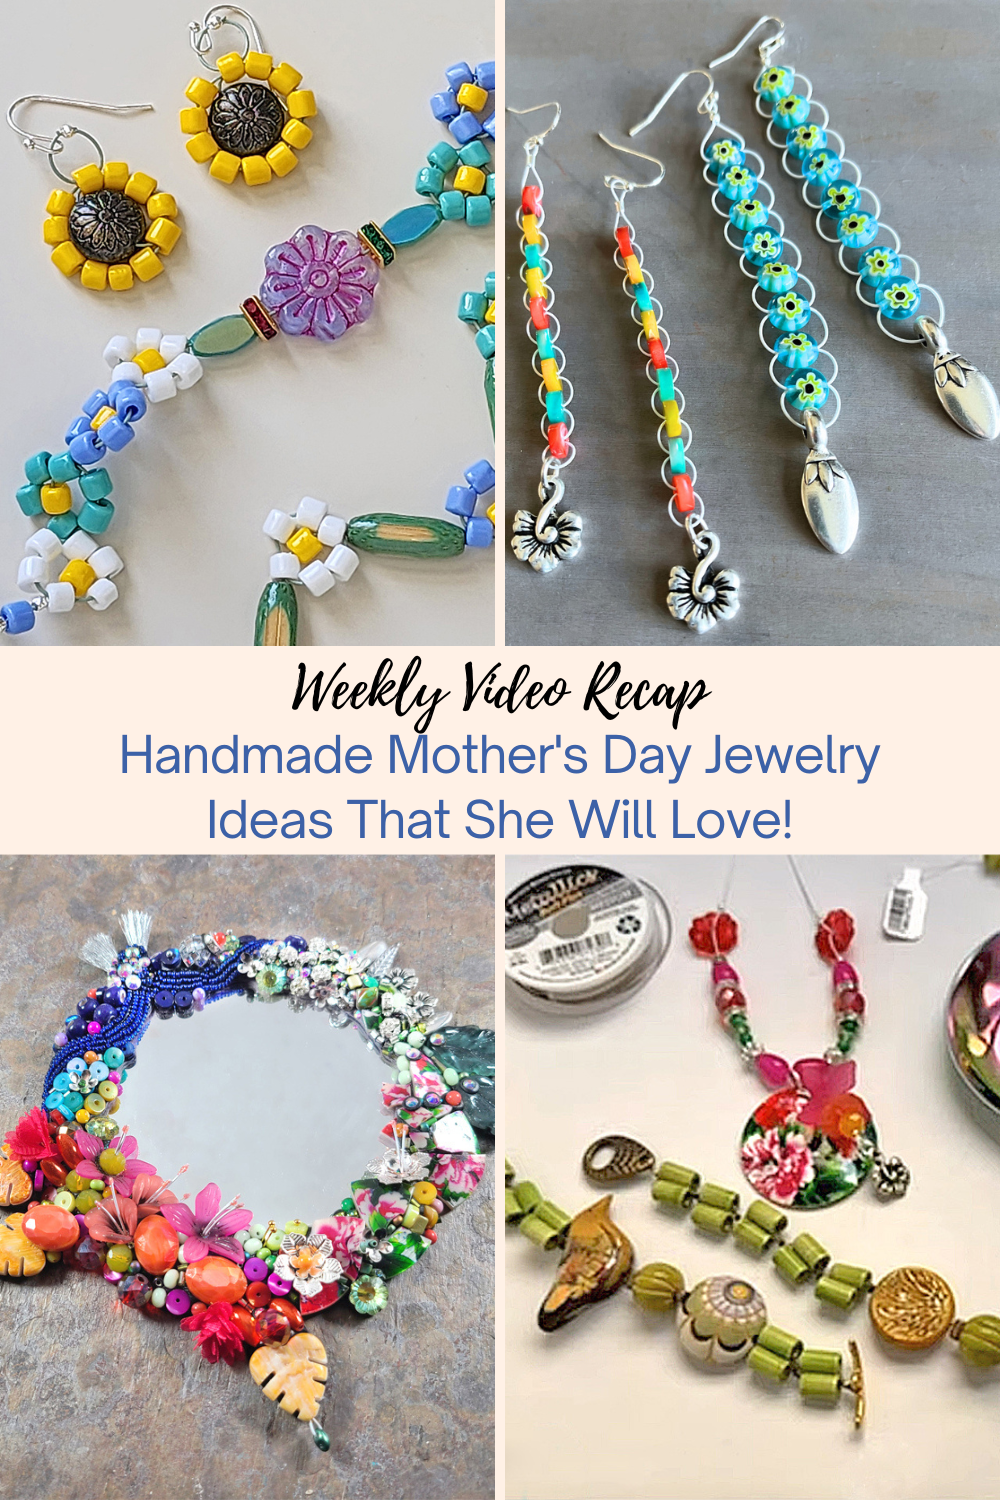 Handmade Mother's Day Jewelry Ideas That She Will Love! Collage